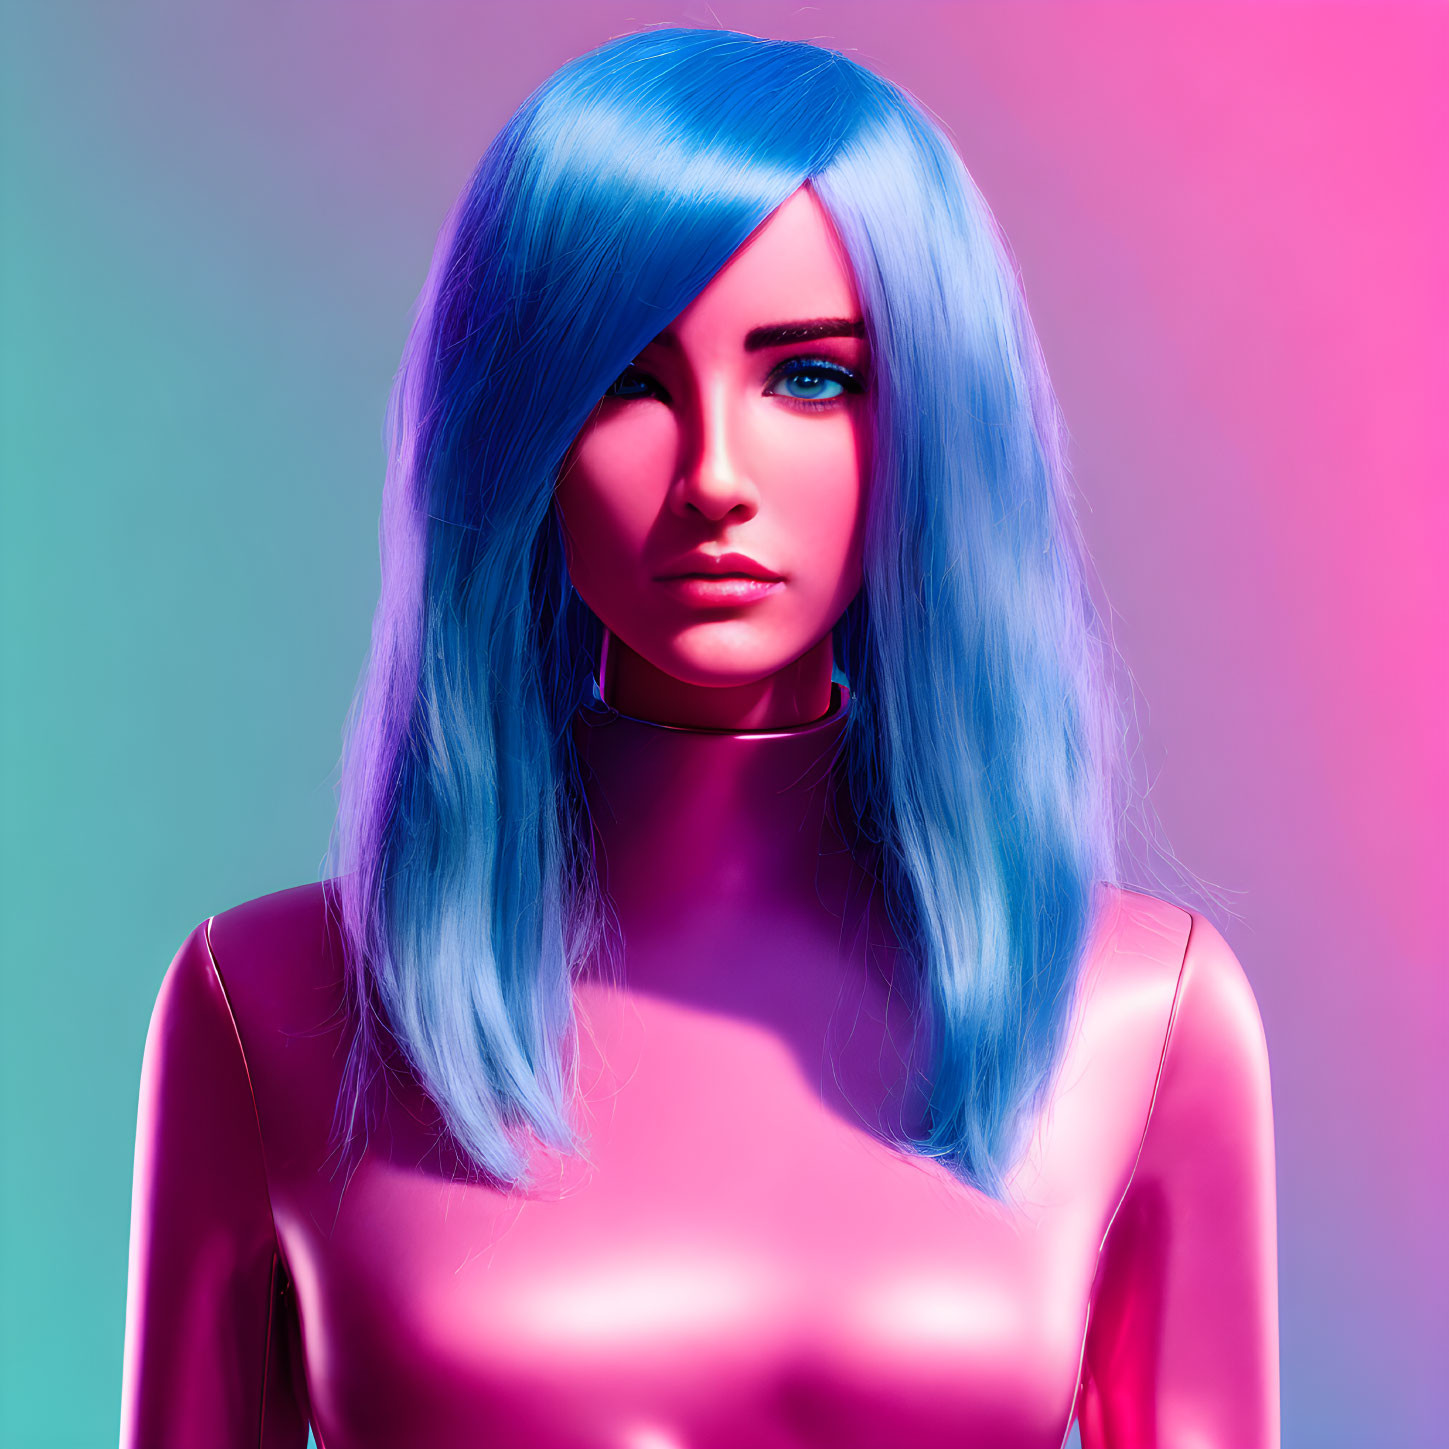 Vibrant digital art portrait: woman with blue hair, silver choker, pink and teal backdrop